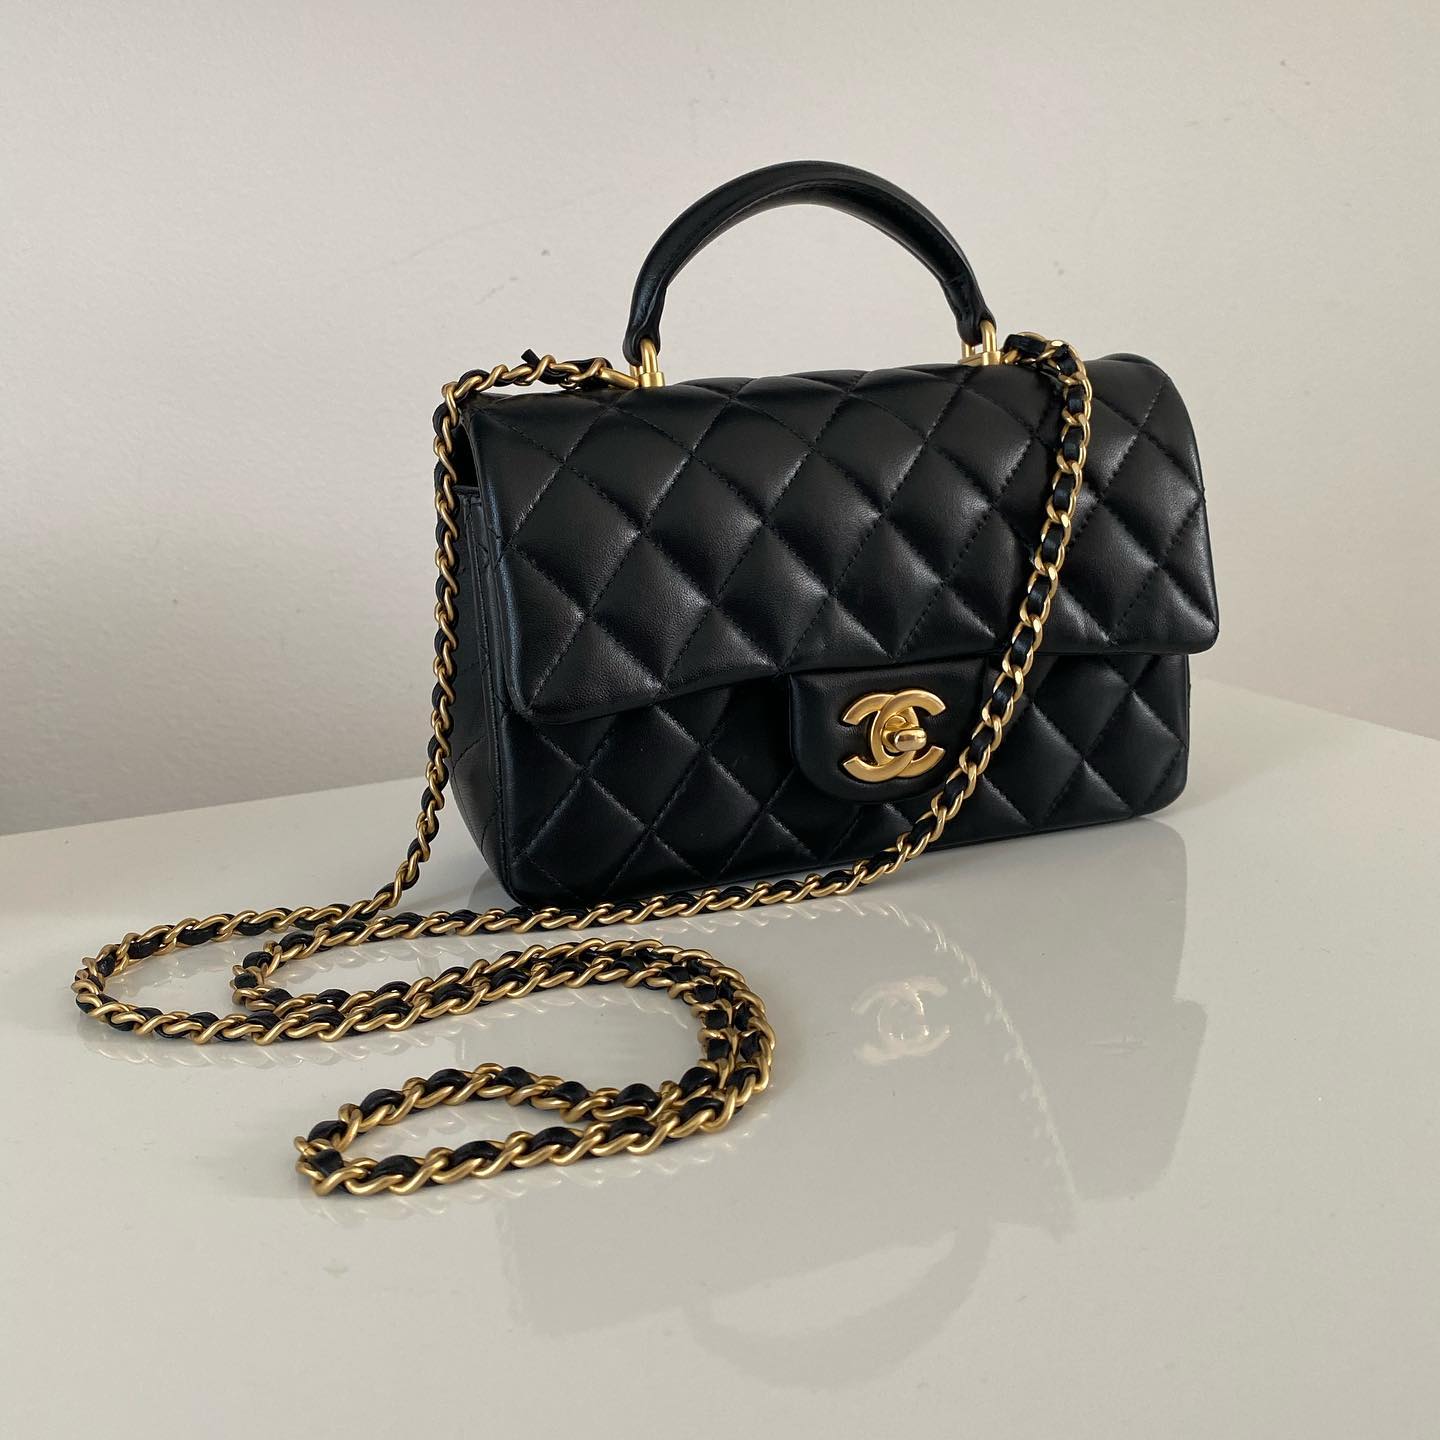 HOW TO BUY PRELOVED LUXURY ITEMS ON